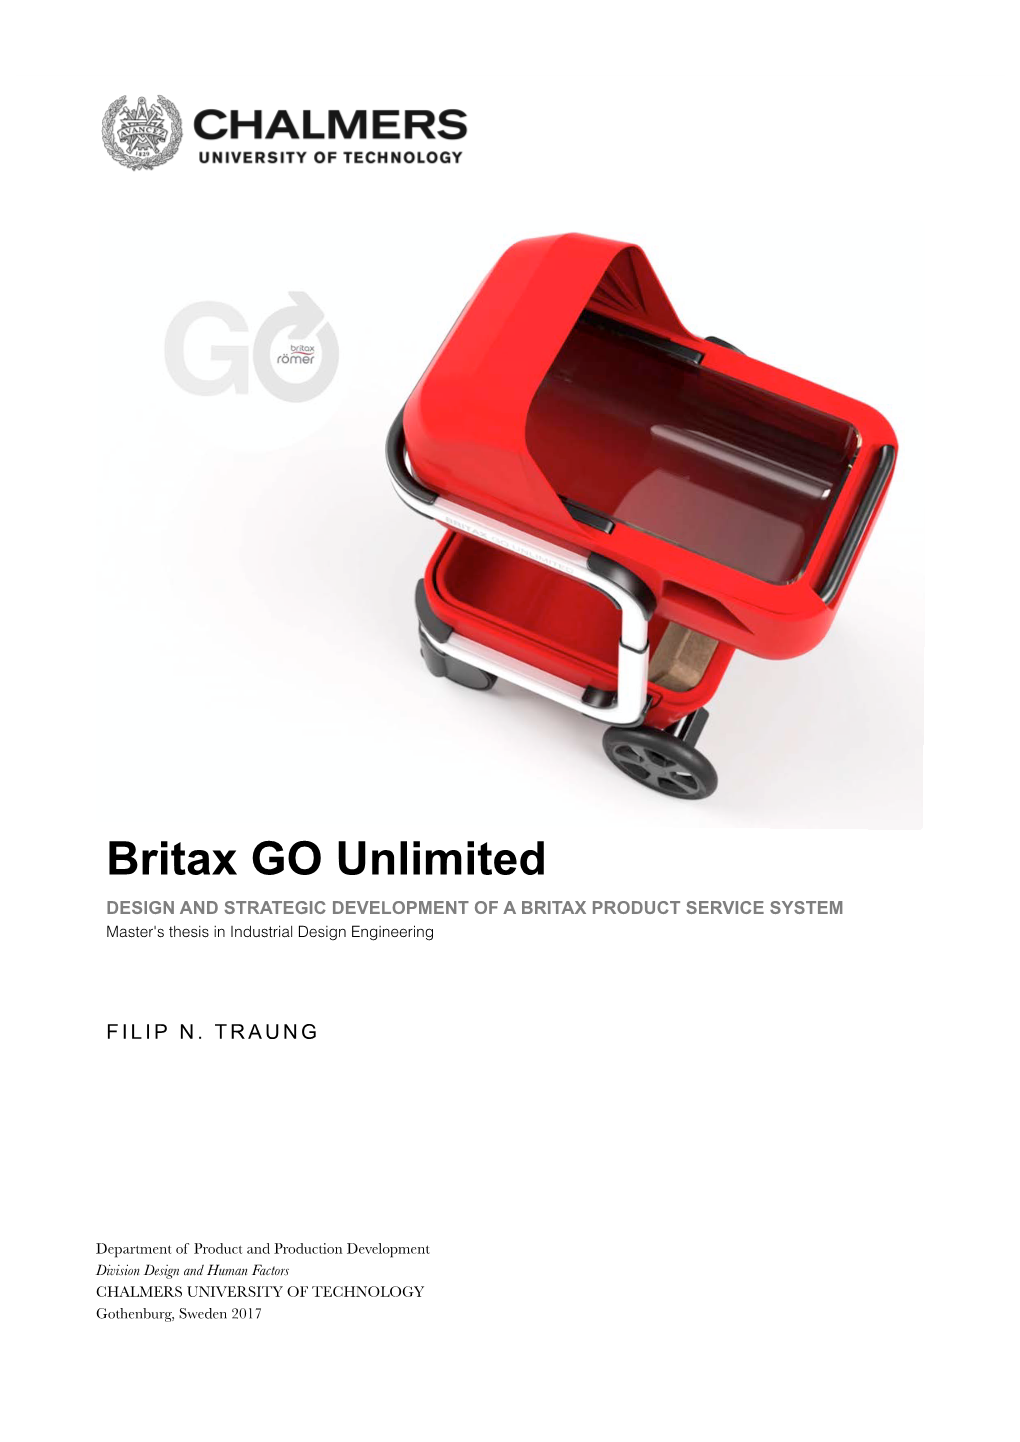 Britax GO Unlimited DESIGN and STRATEGIC DEVELOPMENT of a BRITAX PRODUCT SERVICE SYSTEM Master's Thesis in Industrial Design Engineering